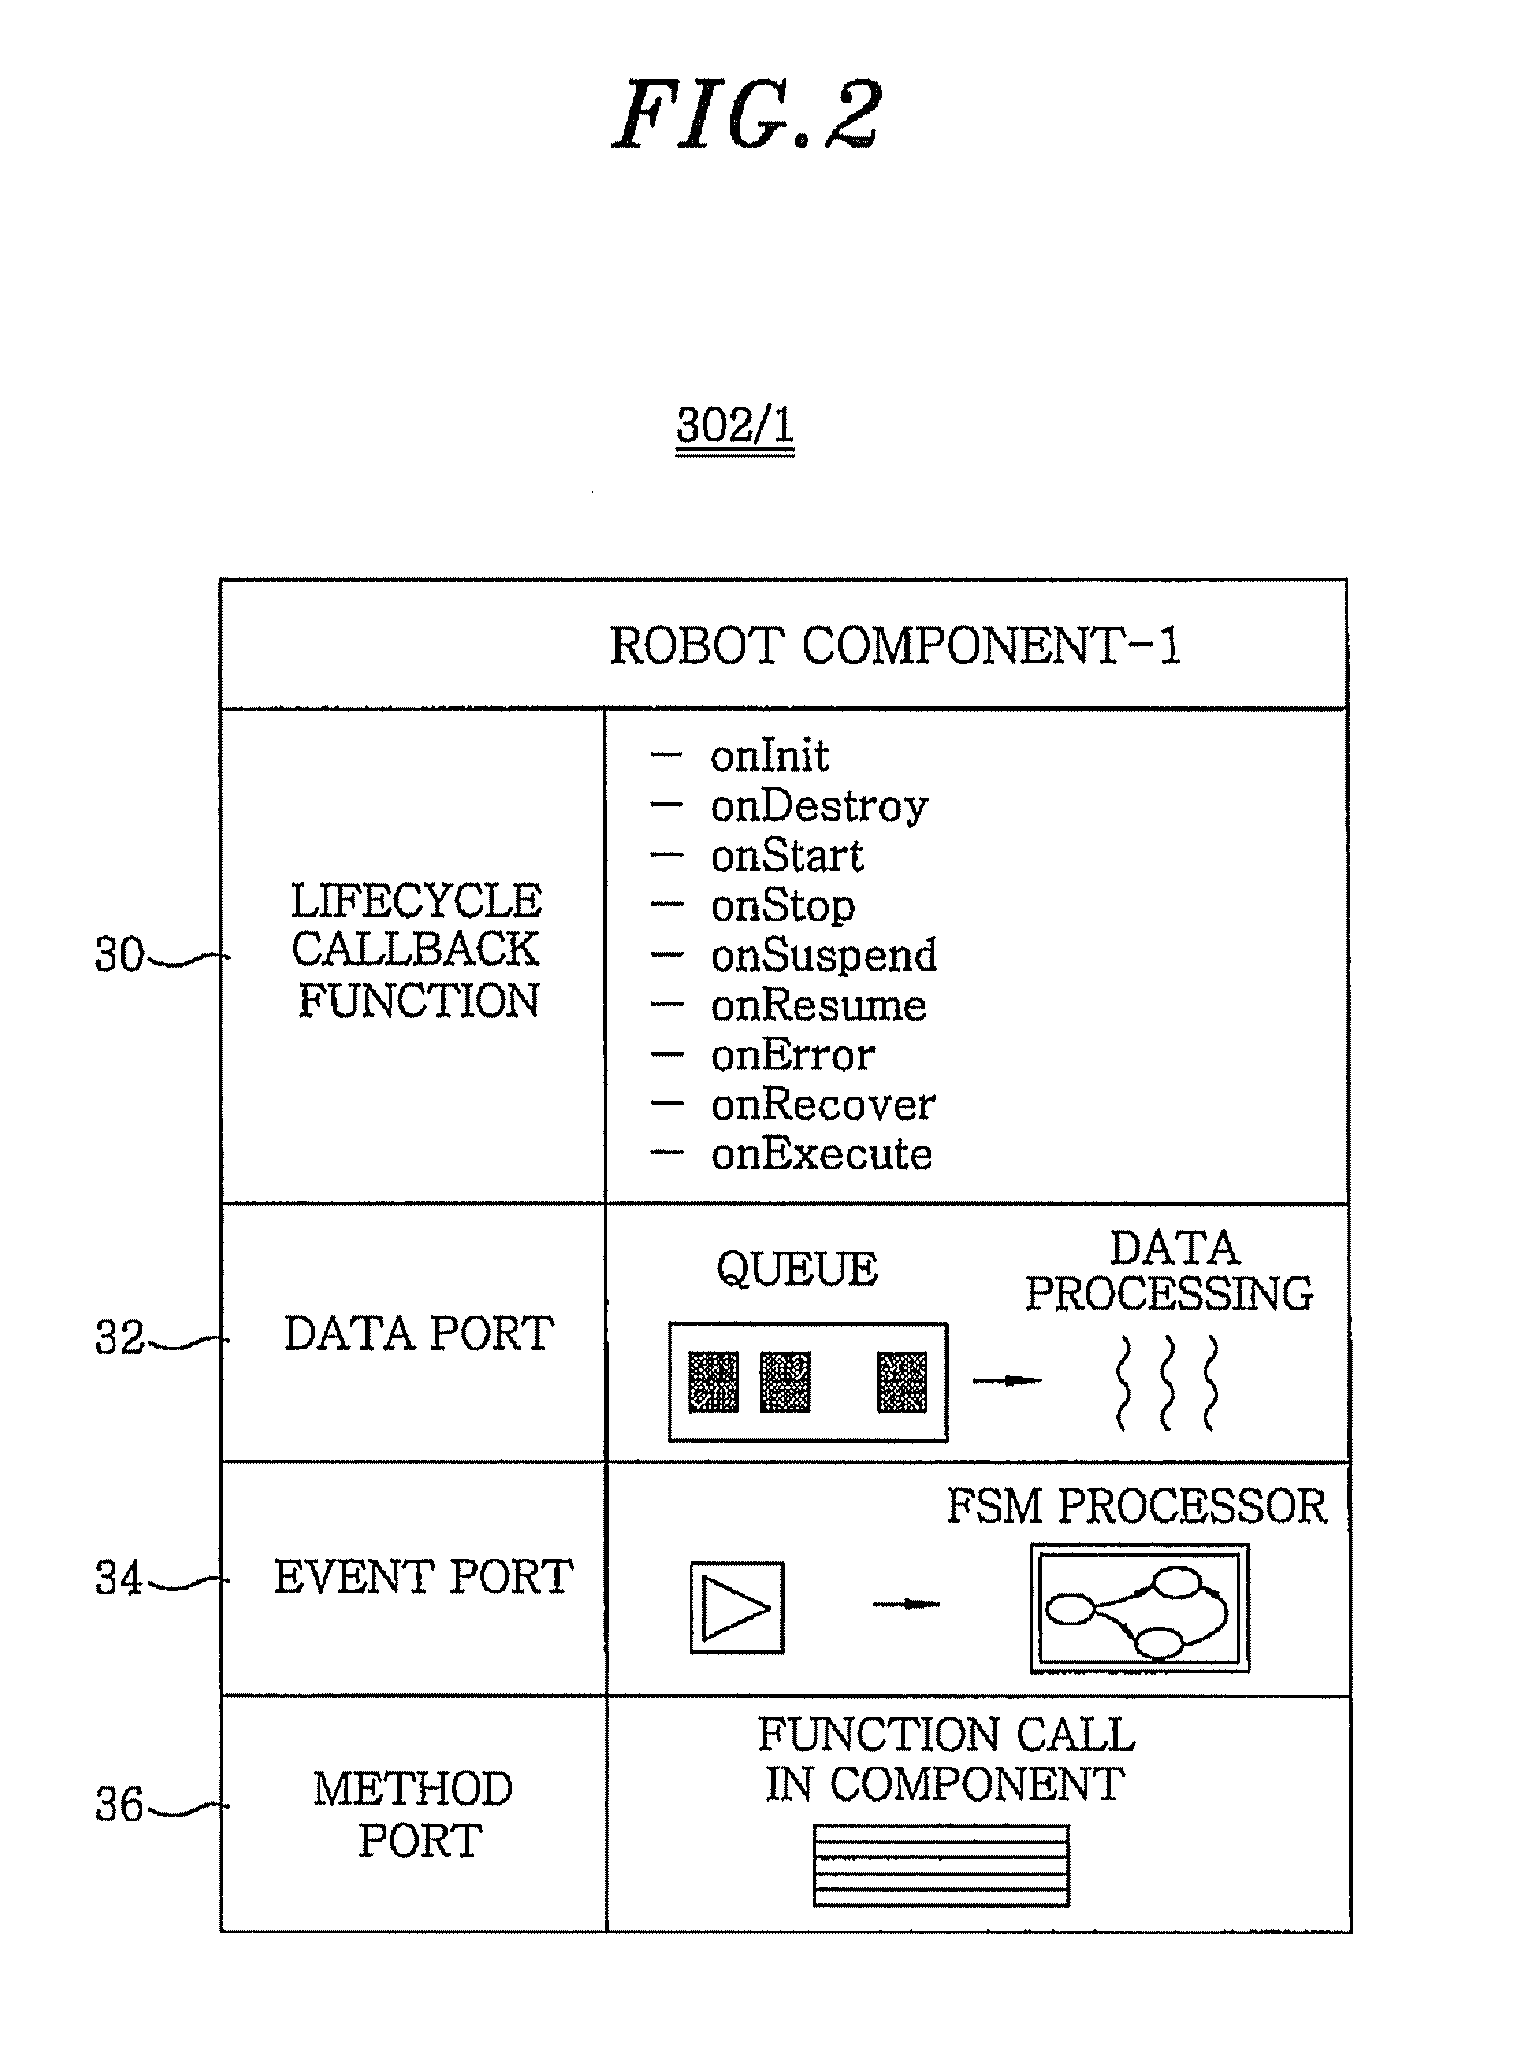 Method and apparatus for managing robot components